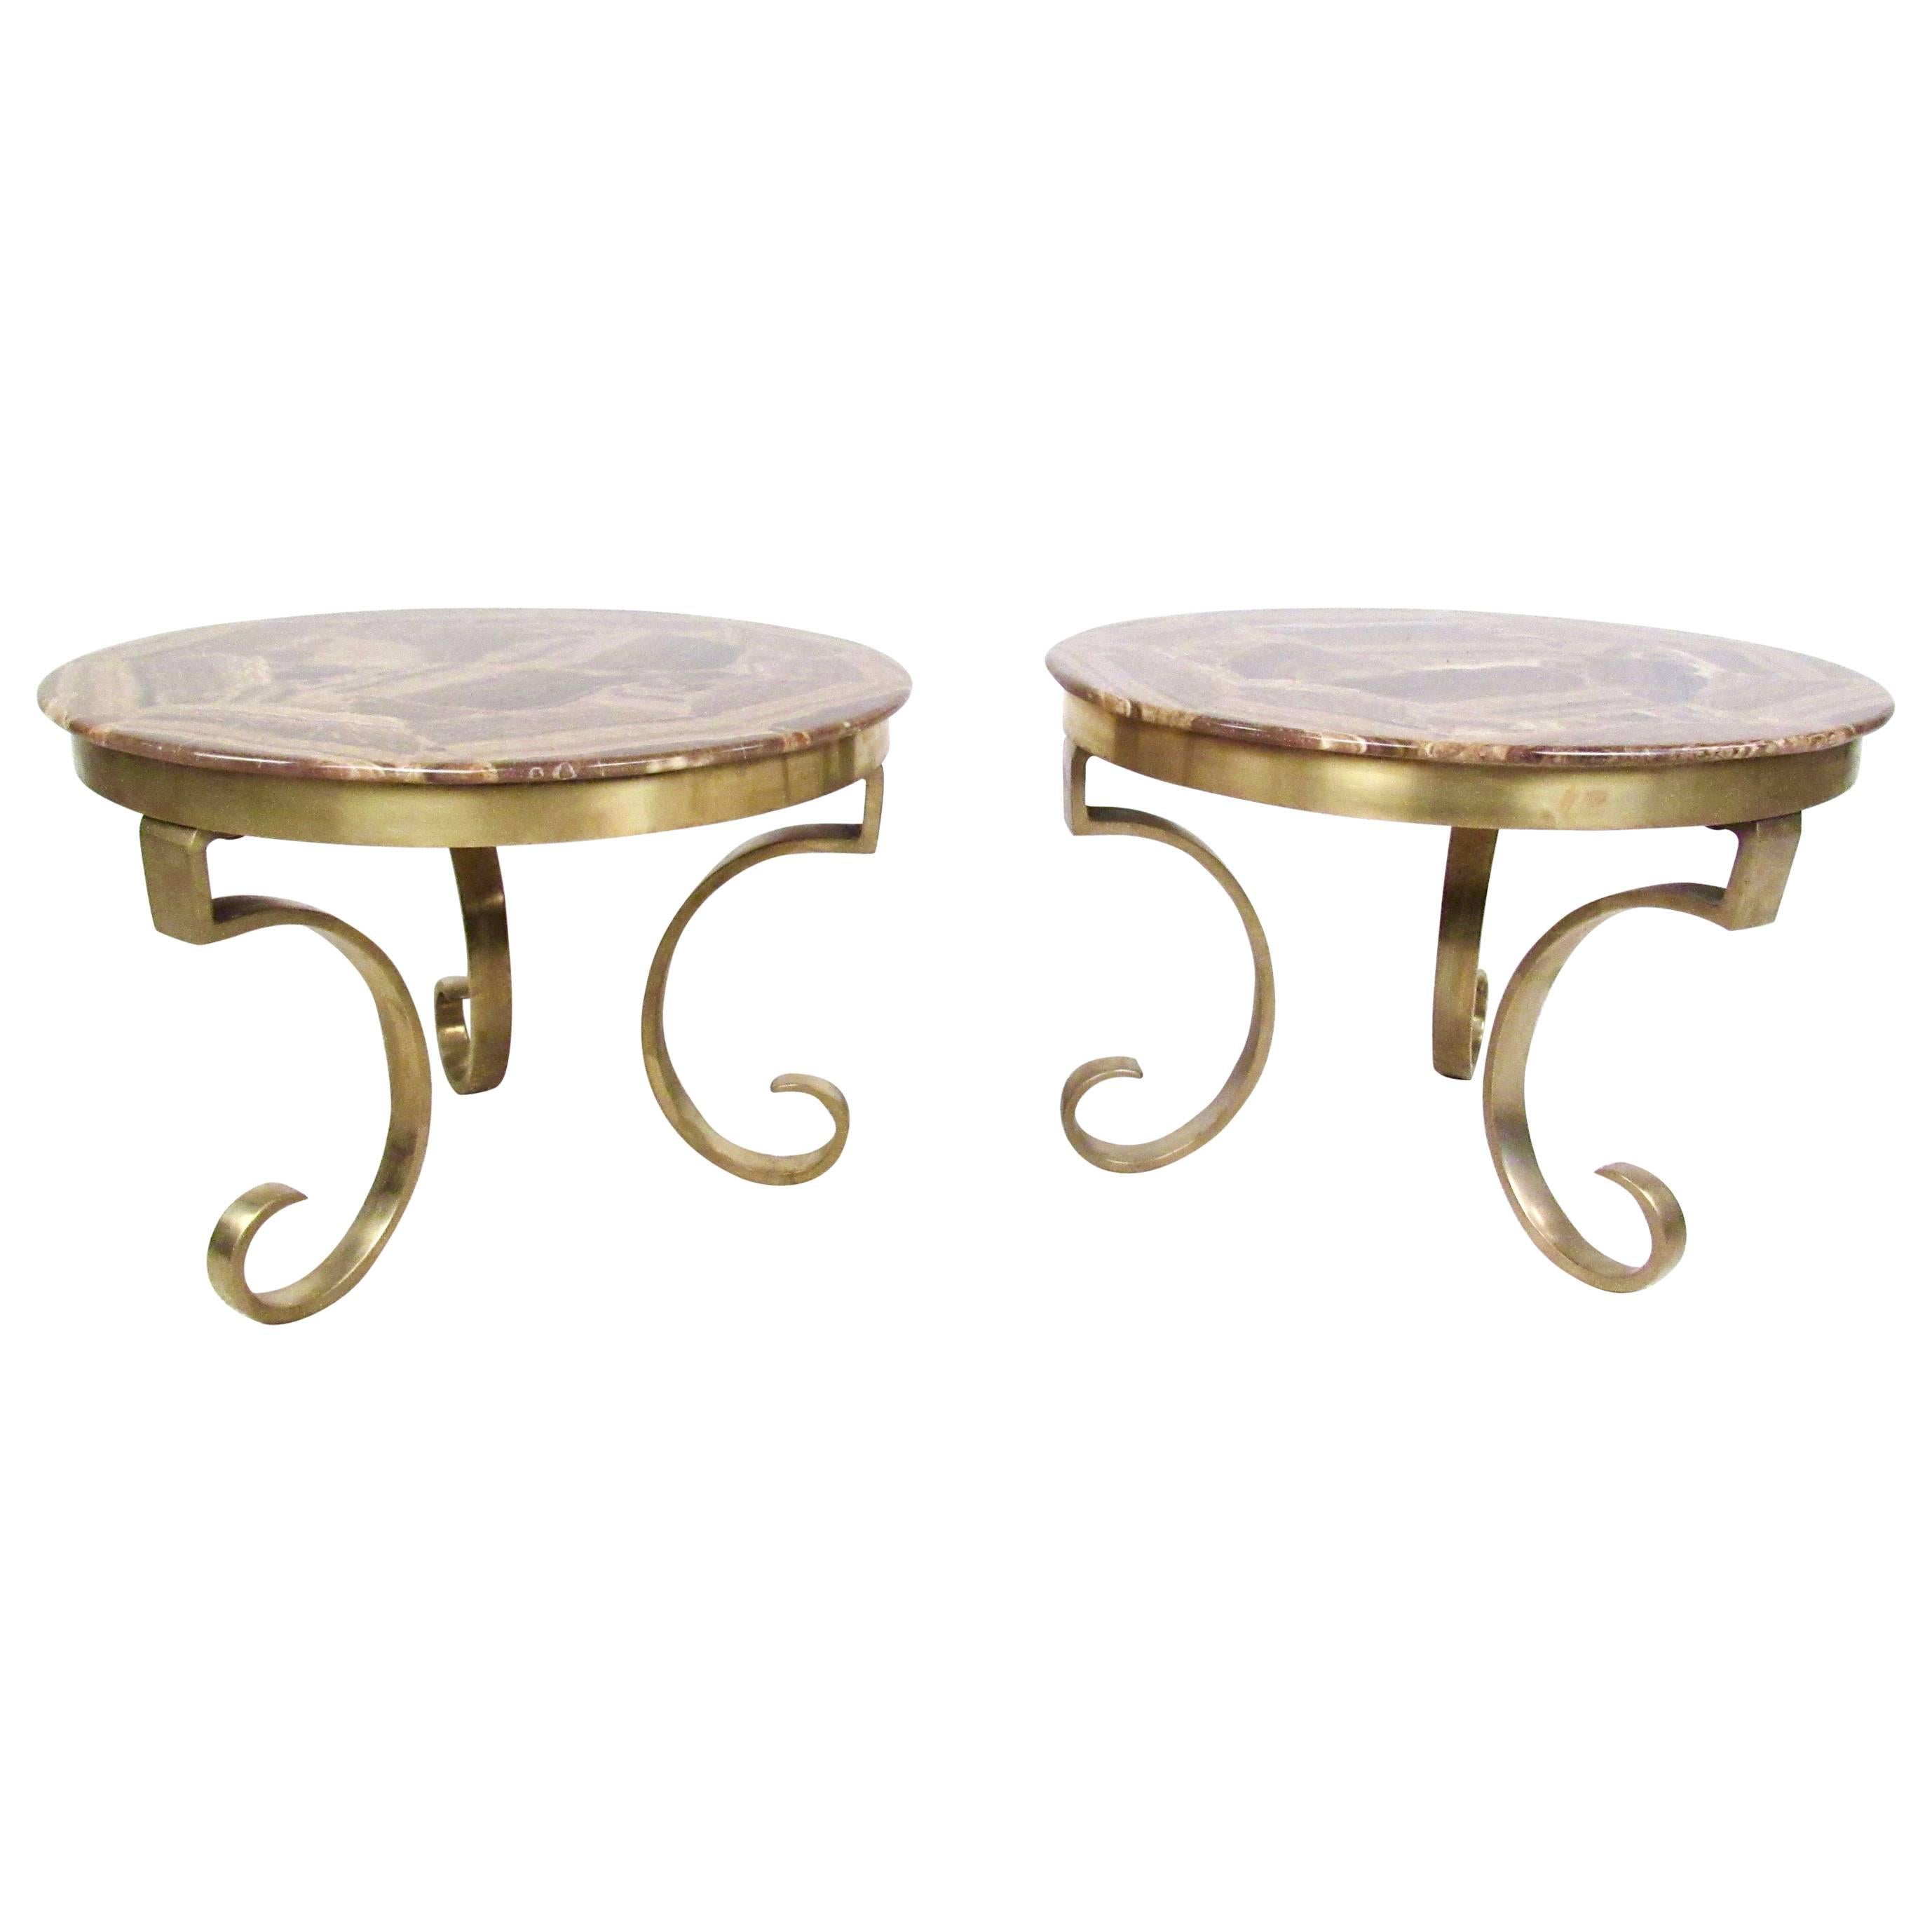 Muller of Mexico Endtables in Onyx and Brass